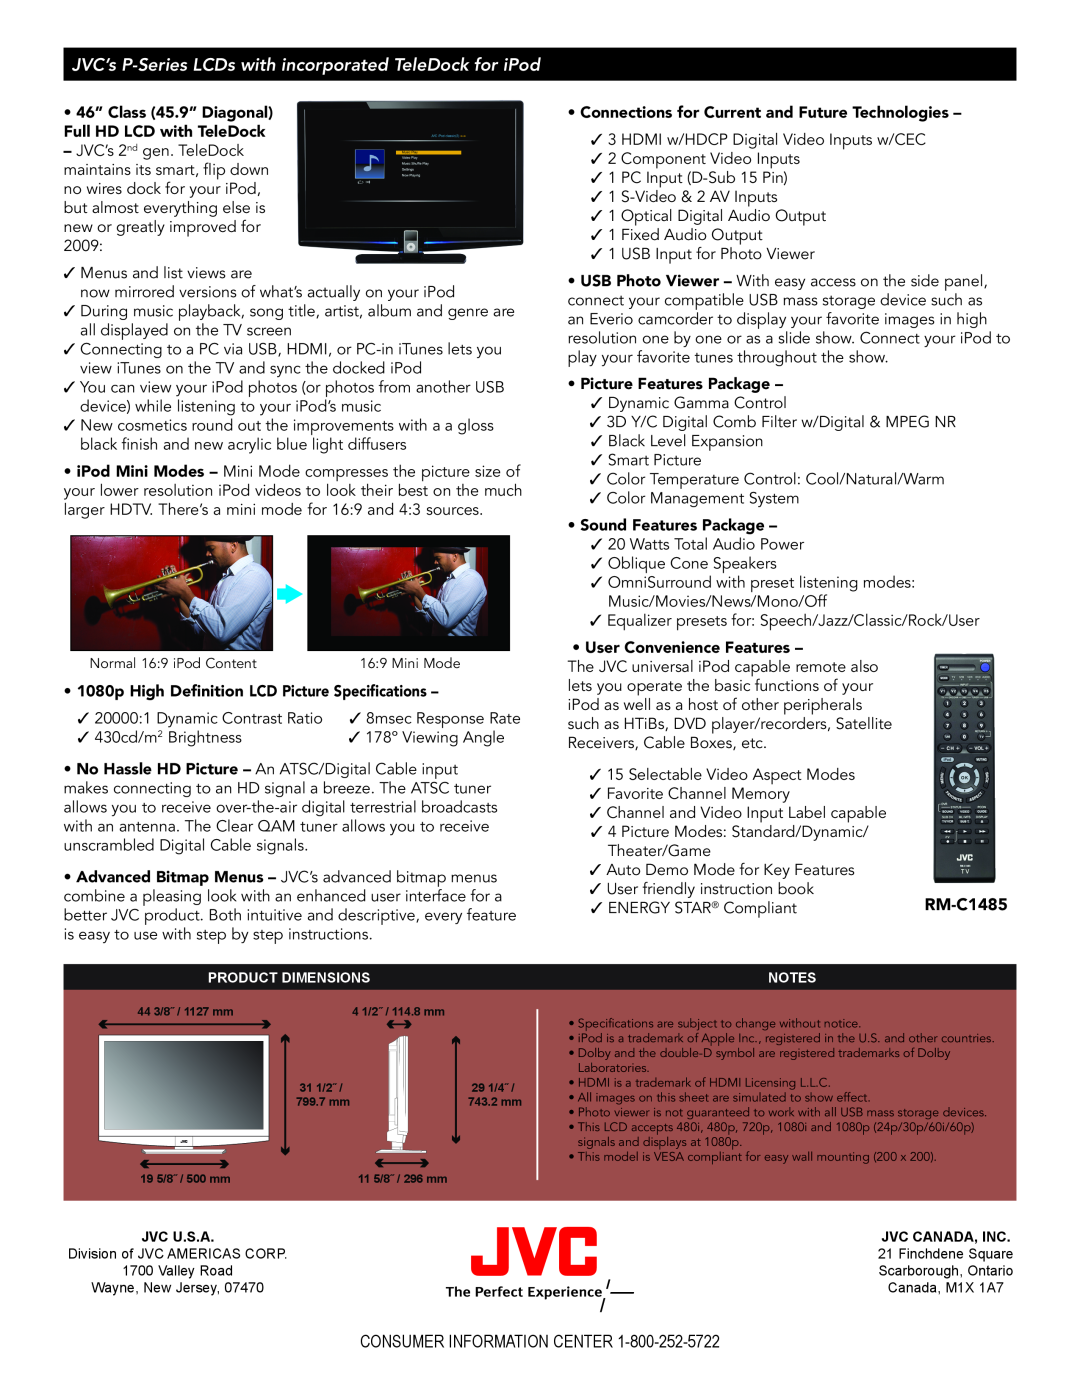 JVC LT-46P300 manual JVC’s P-Series LCDs with incorporated TeleDock for iPod, RM-C1485, Consumer Information Center 